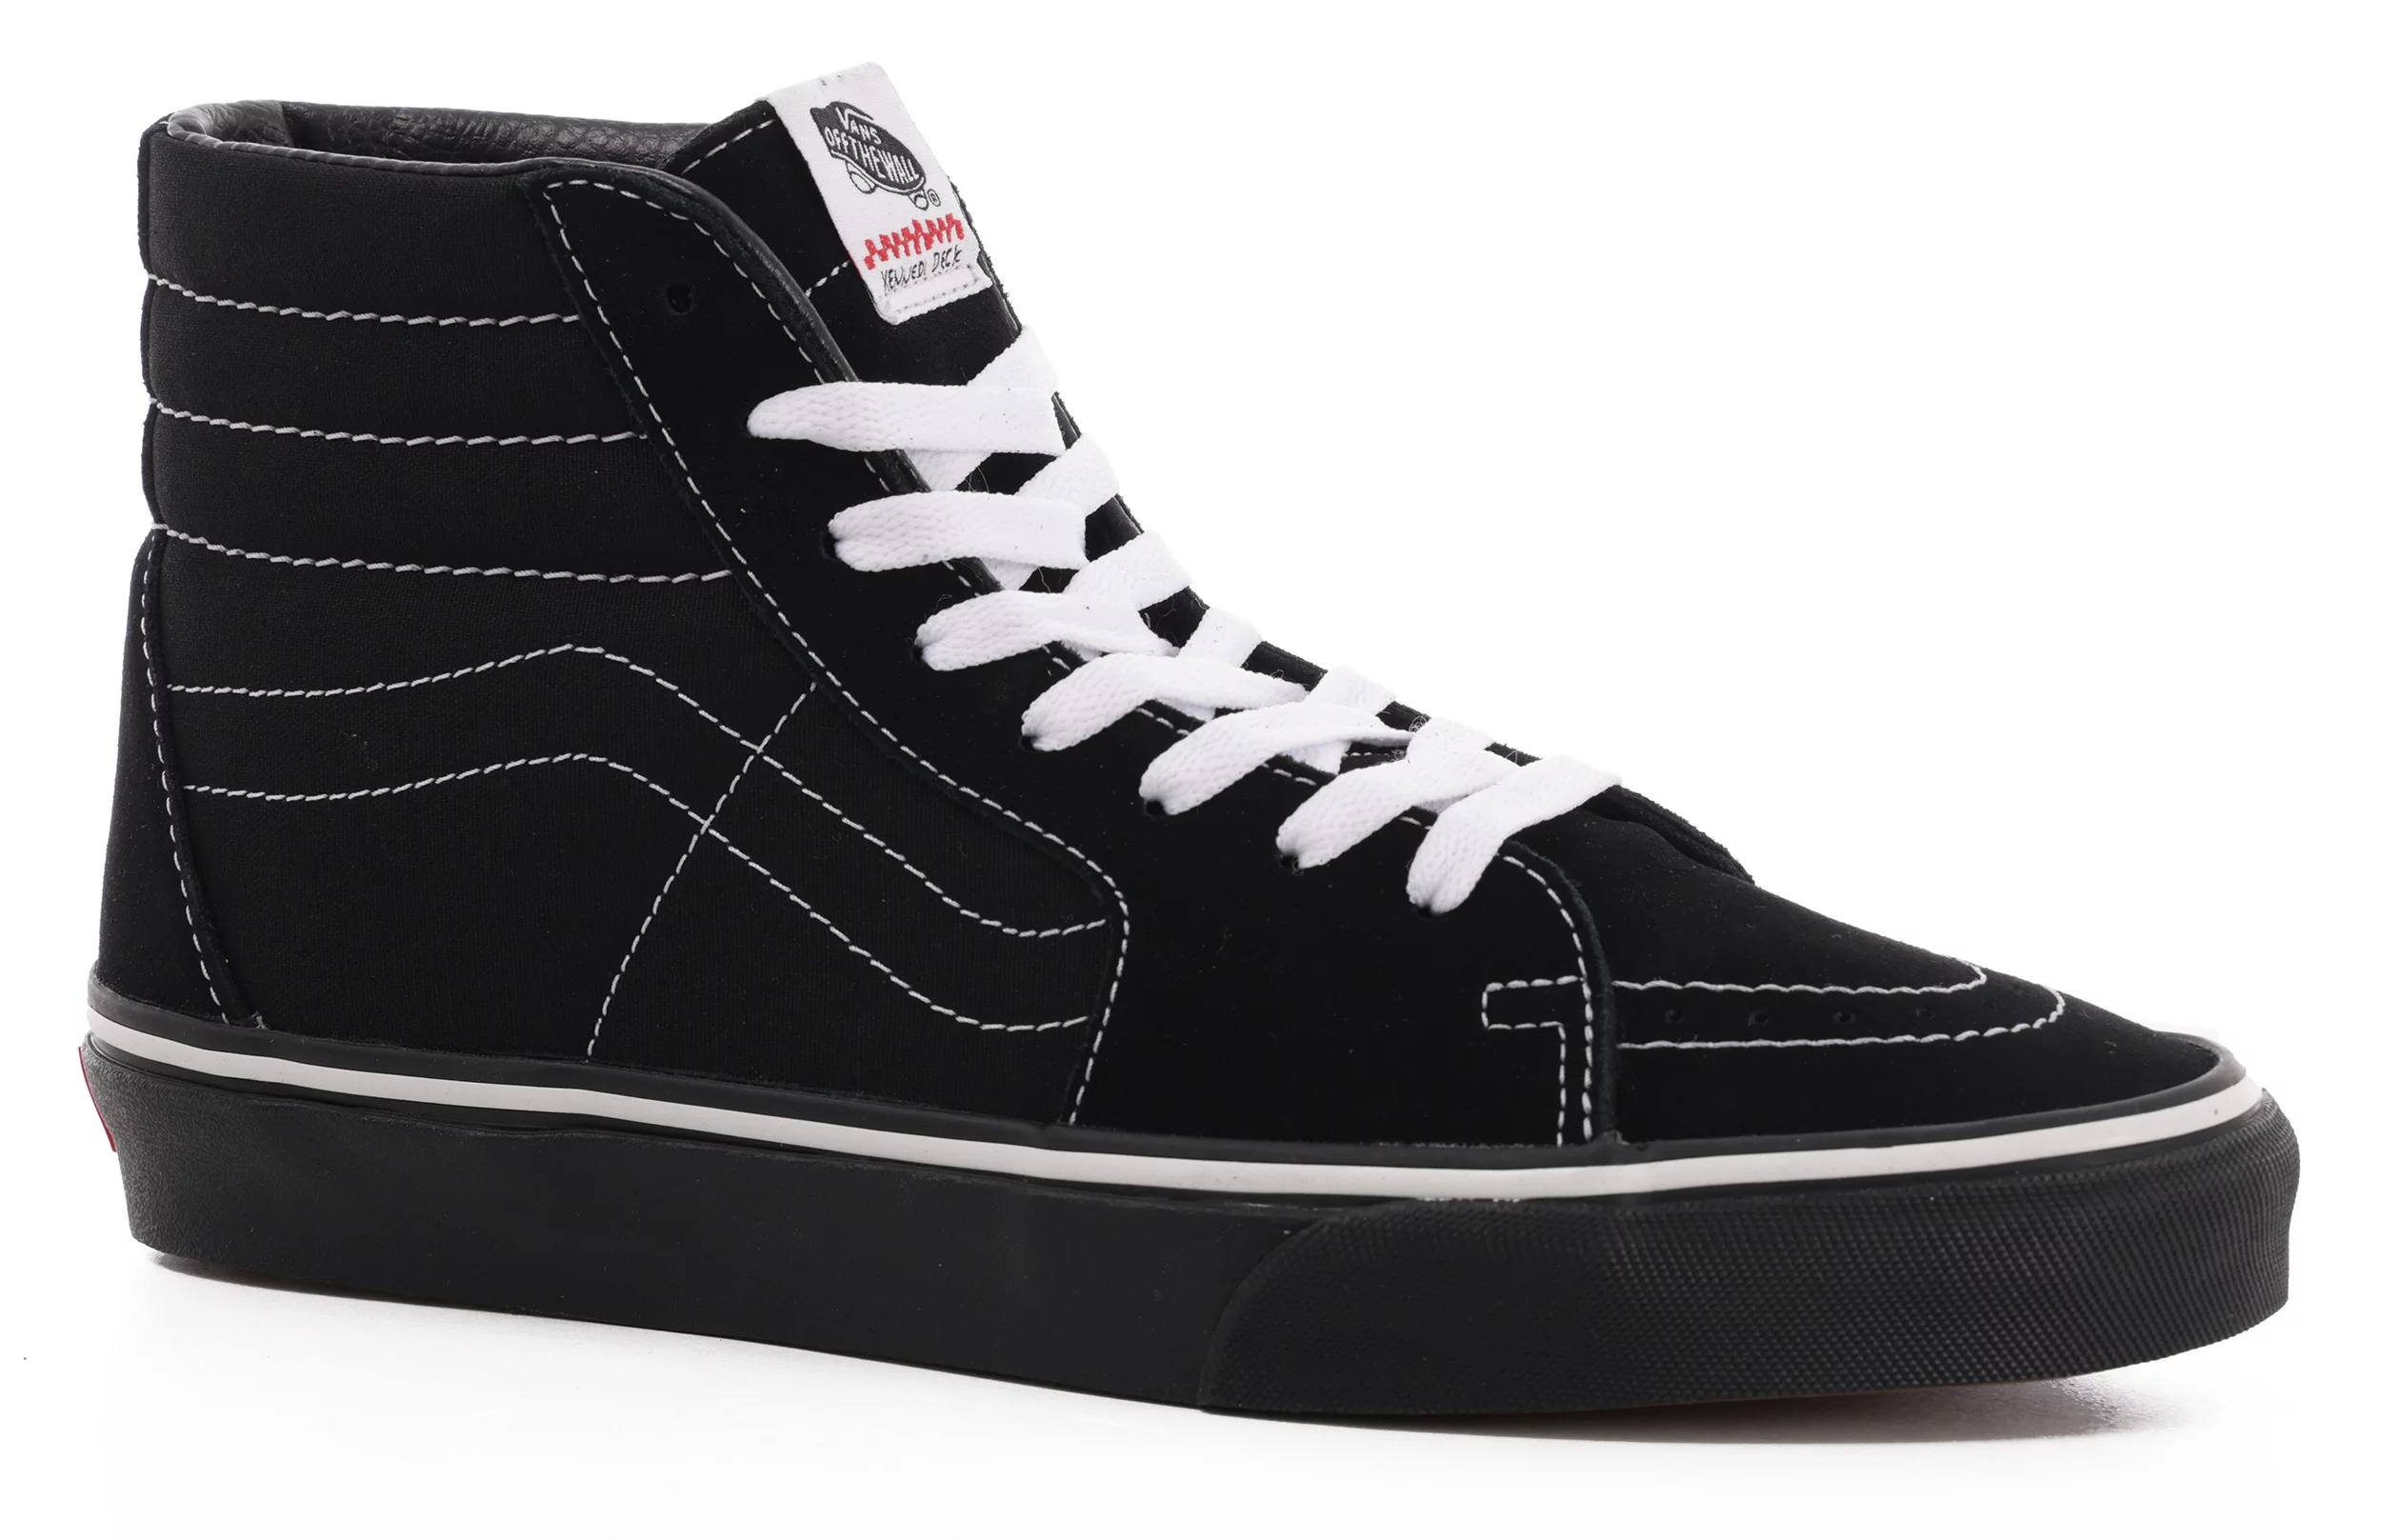 rocket sextant Pay attention to Vans Sk8-Hi Skate Shoes - (kennedi deck) black/white - Free Shipping |  Tactics